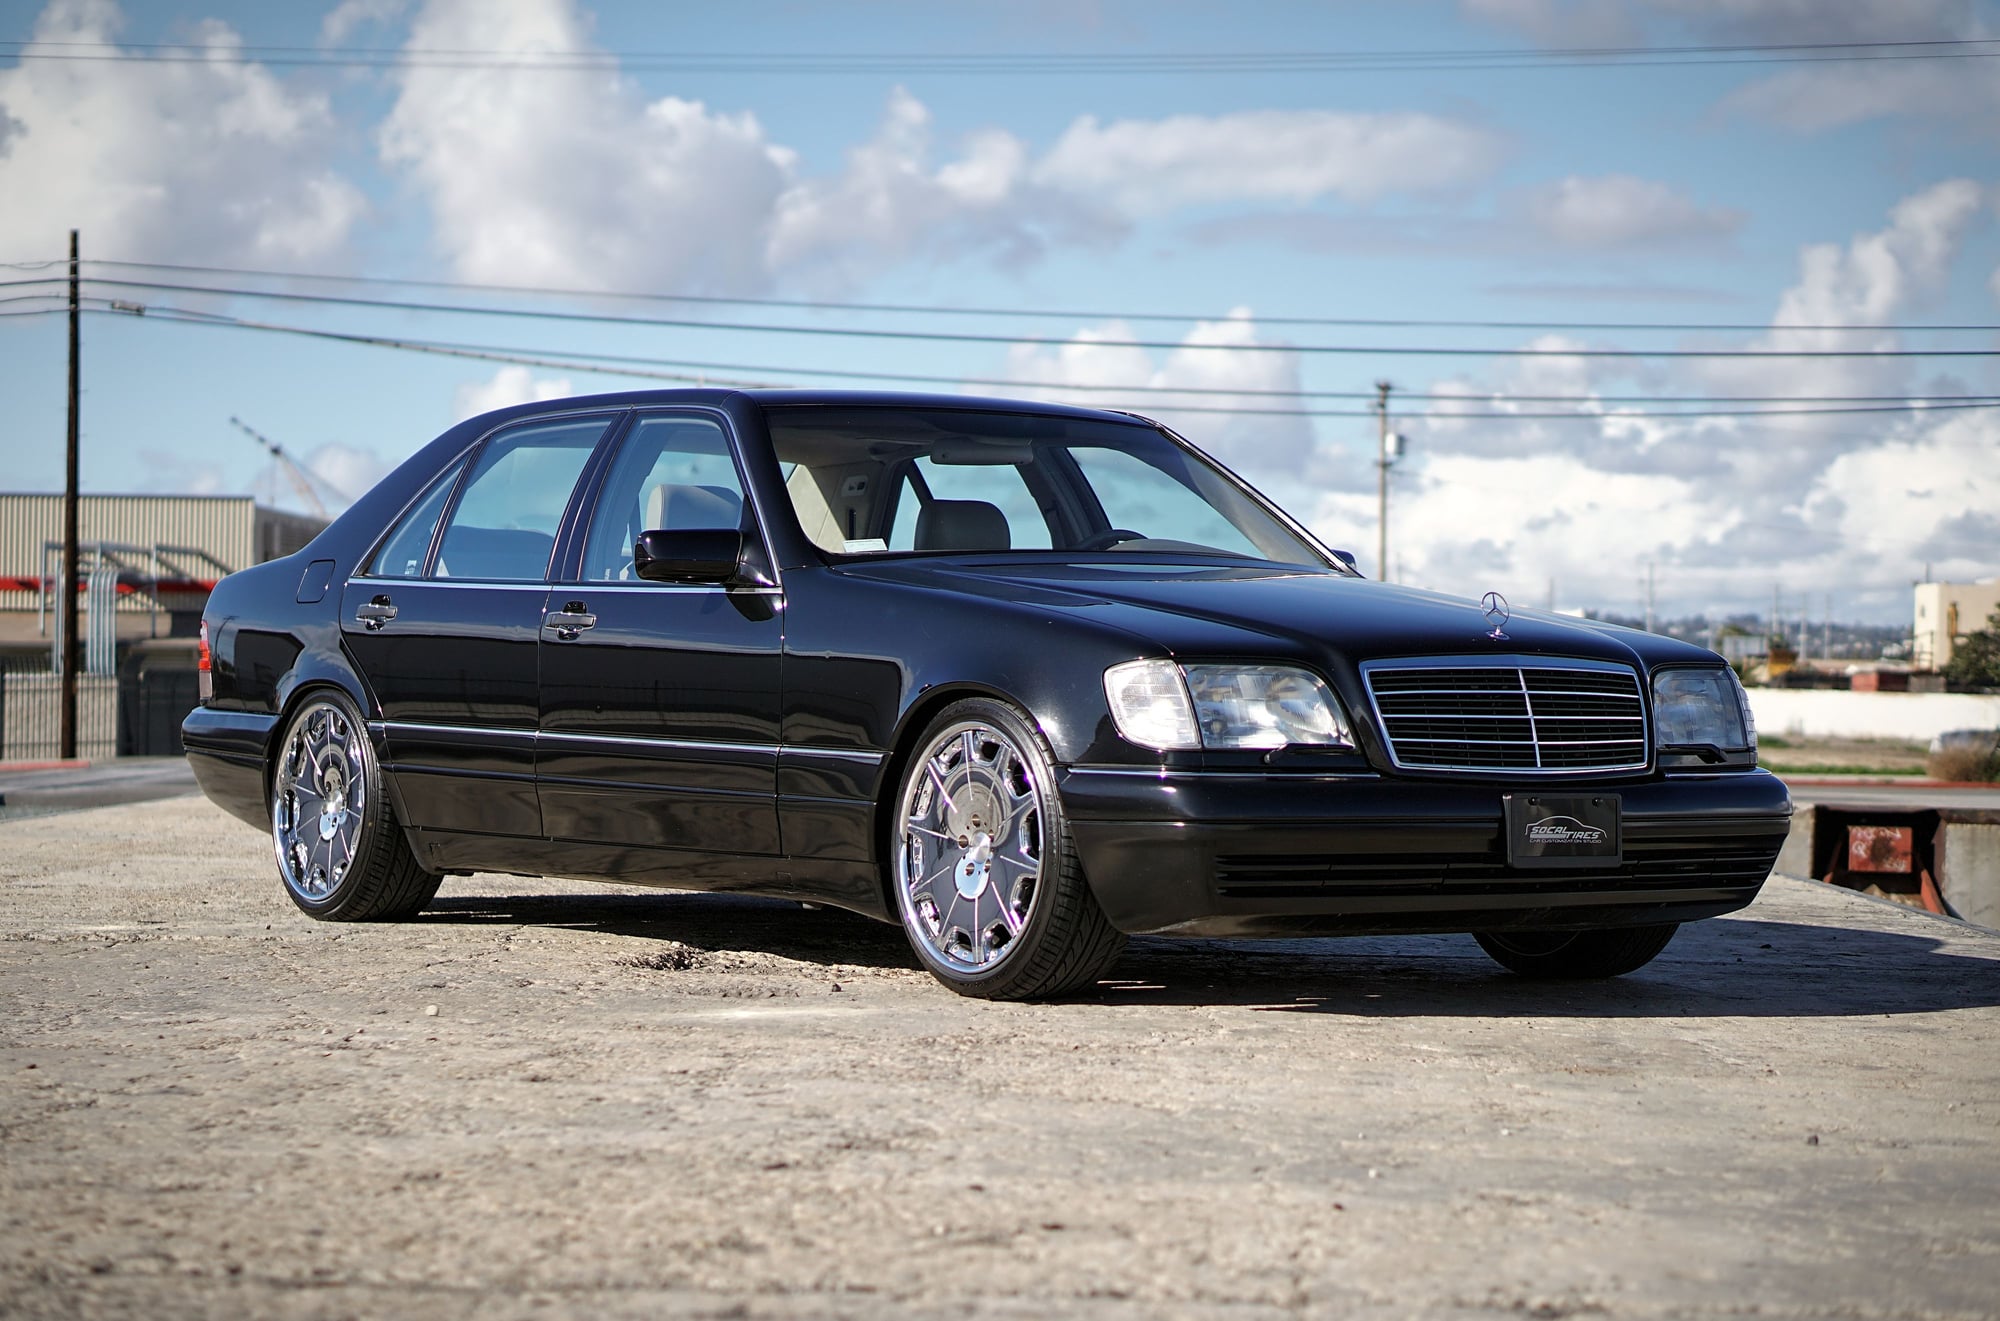 1998 Mercedes-Benz S320 - FS:  1998 Mercedes-Benz s320 /Extremely Clean / Upgrades / Fully Maintained / Stanced - Used - VIN WDBGA33G6WA399987 - 146,200 Miles - 6 cyl - 2WD - Automatic - Sedan - Black - Lemon Grove, CA 91945, United States